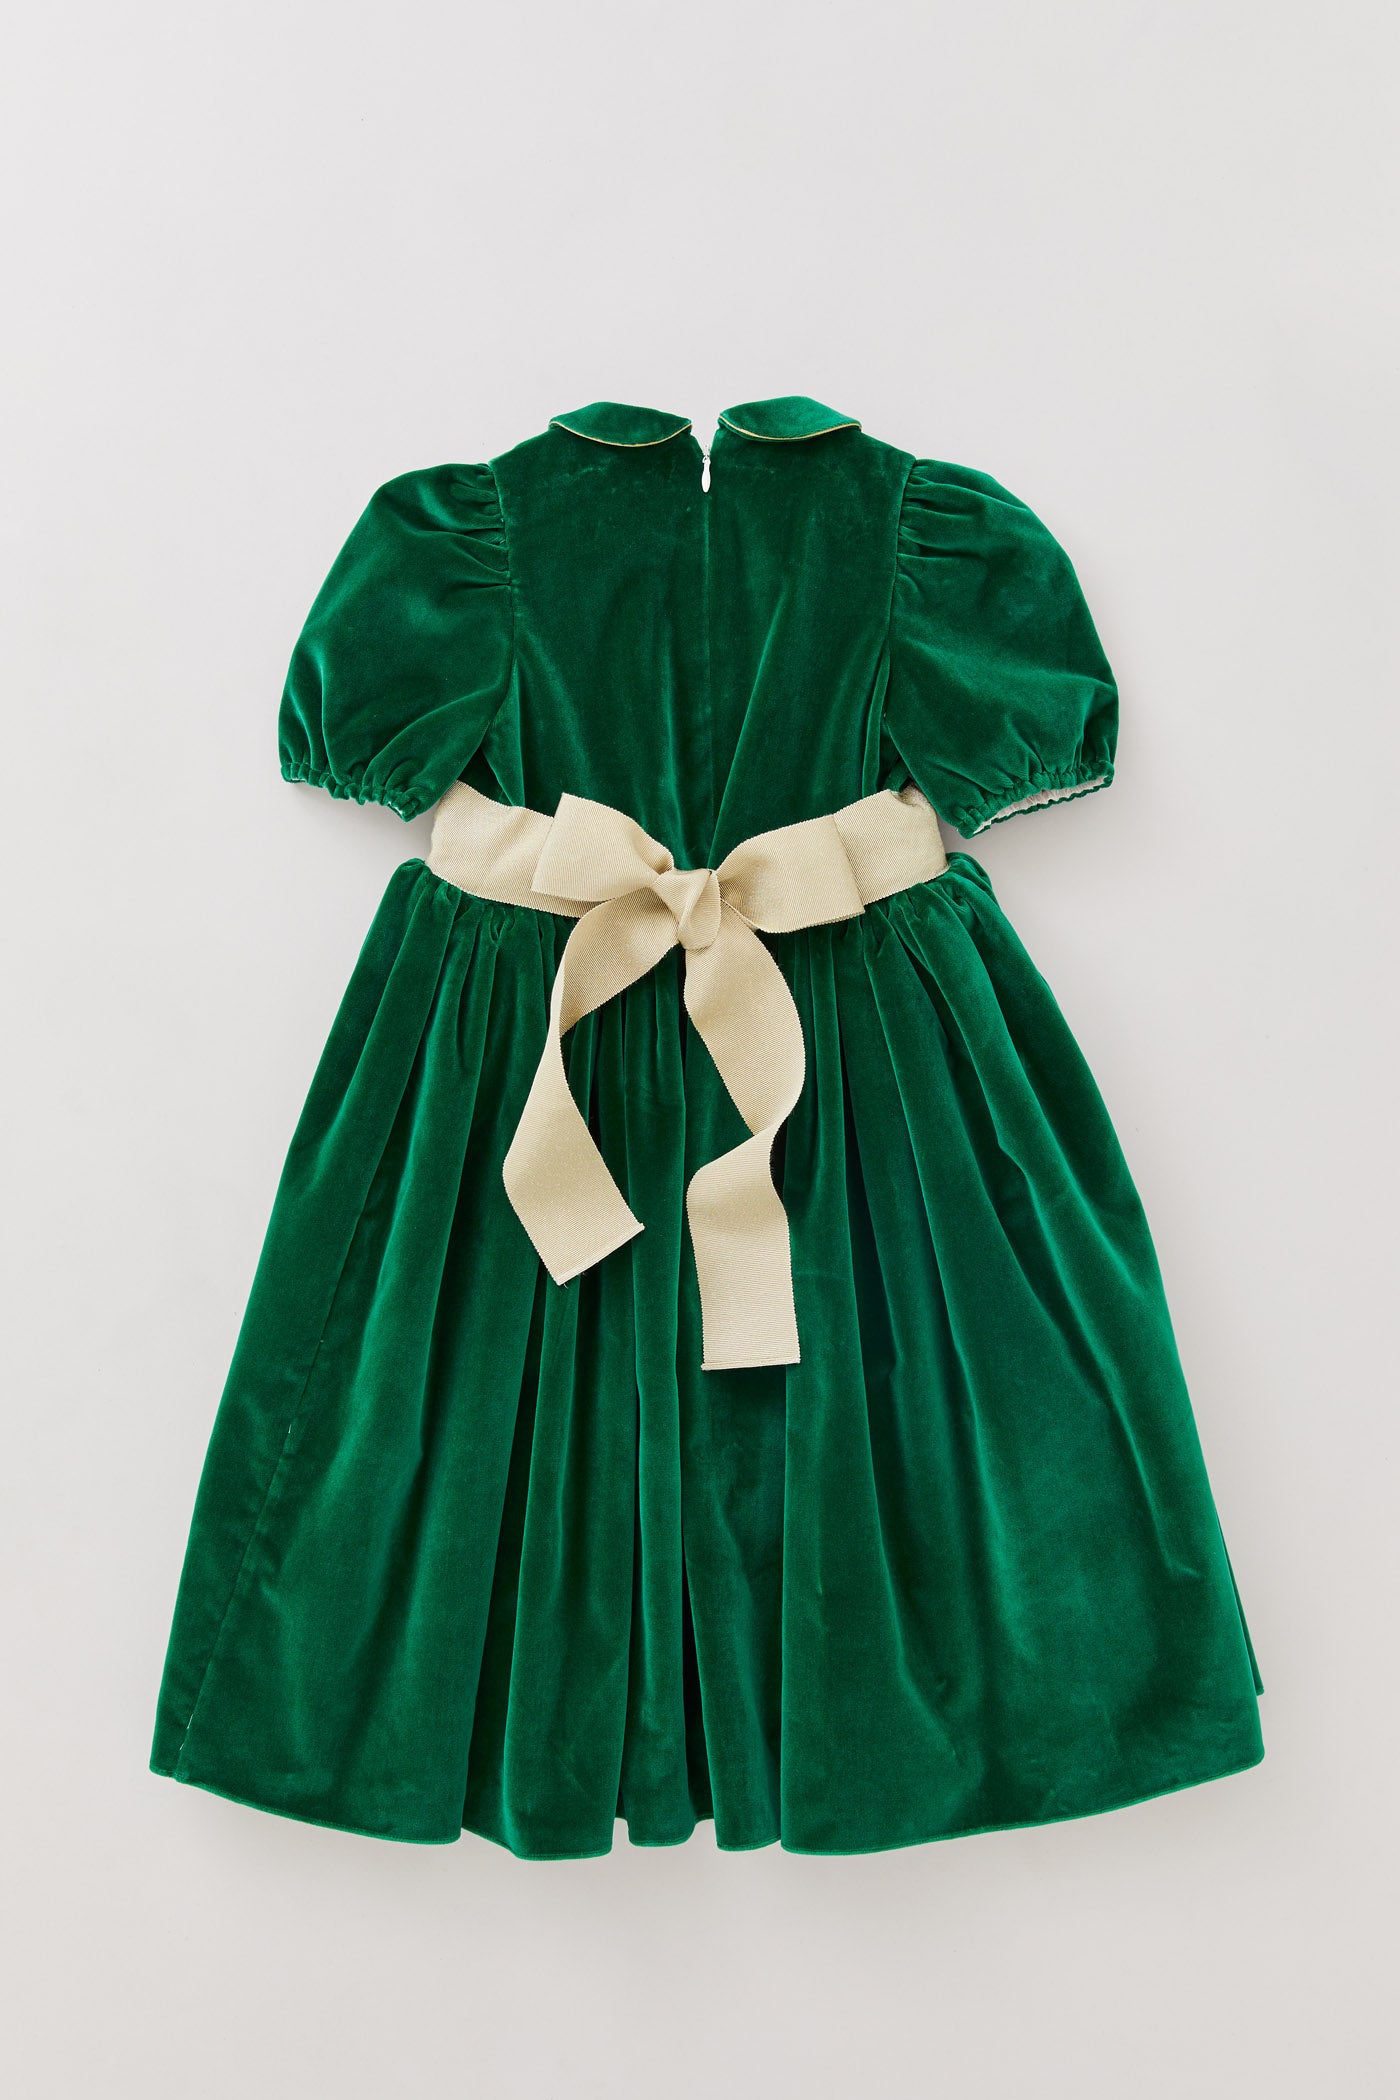 Queen Dress Green Velvet - Occasional Party - Designed by Ingrid Lewis - Strawberries & Cream